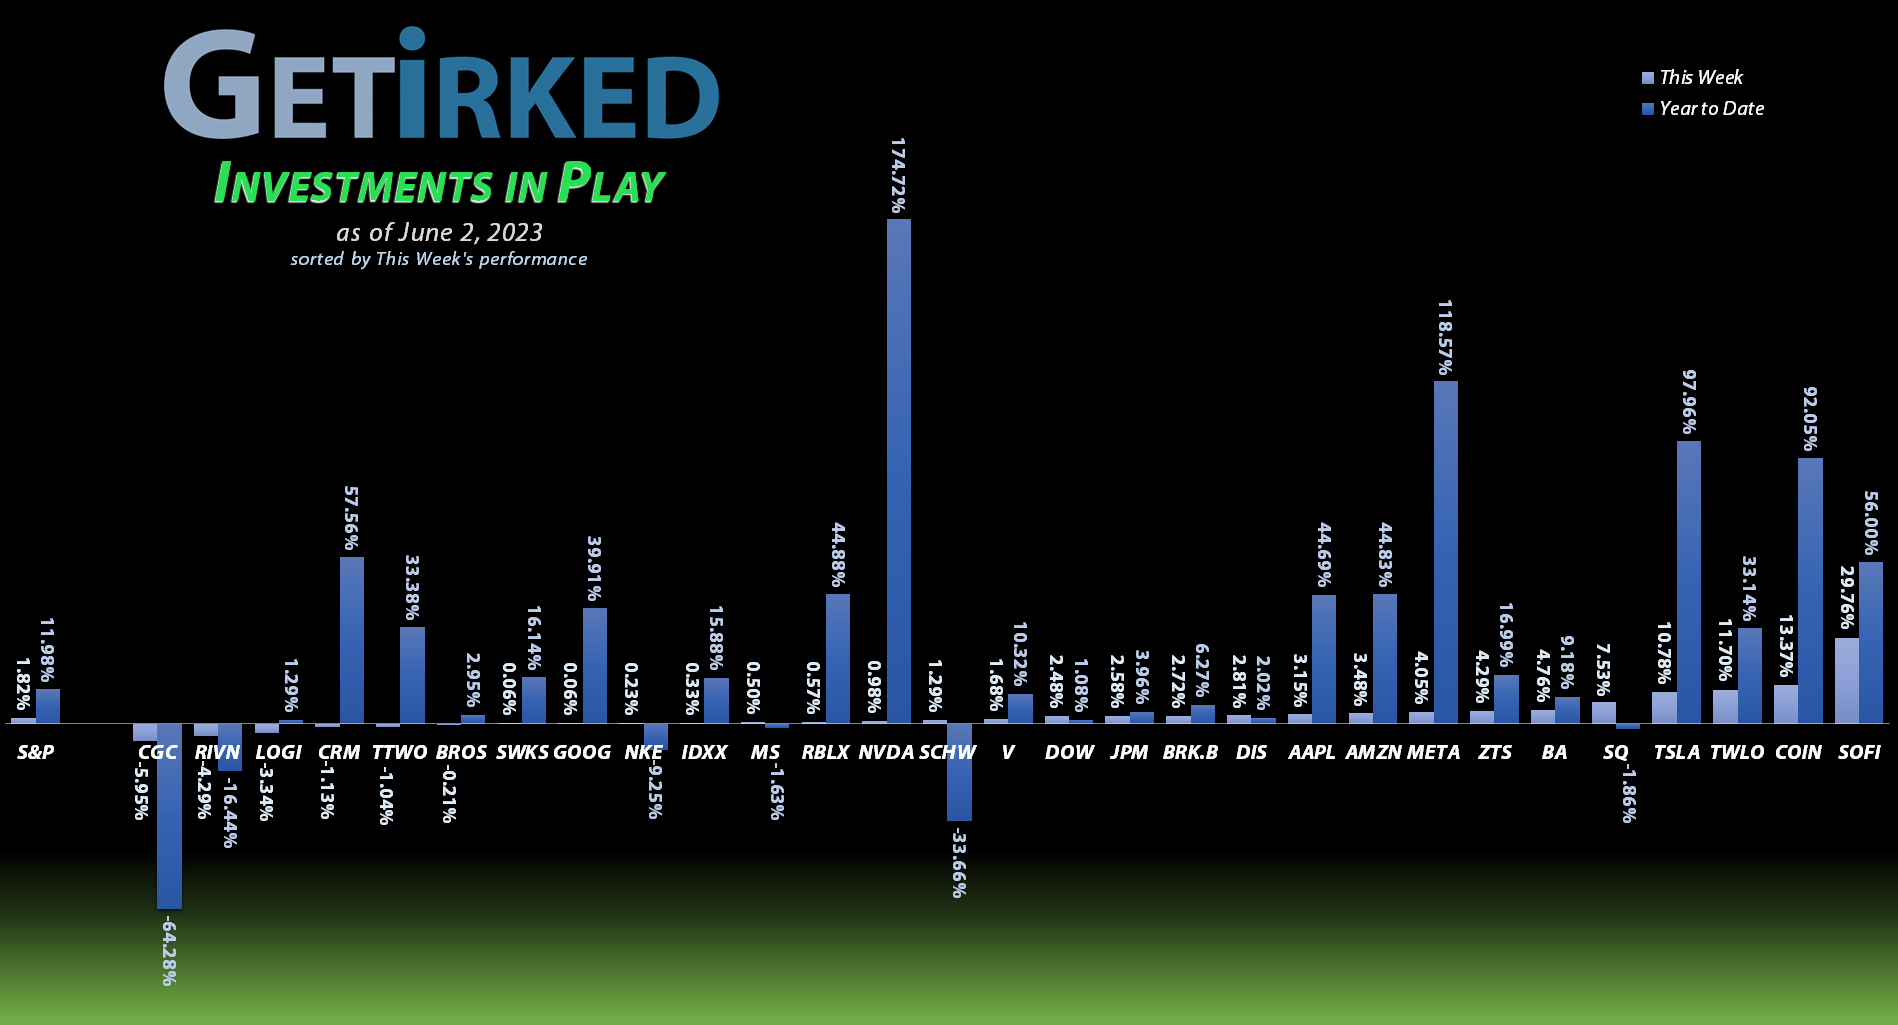 Get Irked's Investments in Play - June 2, 2023